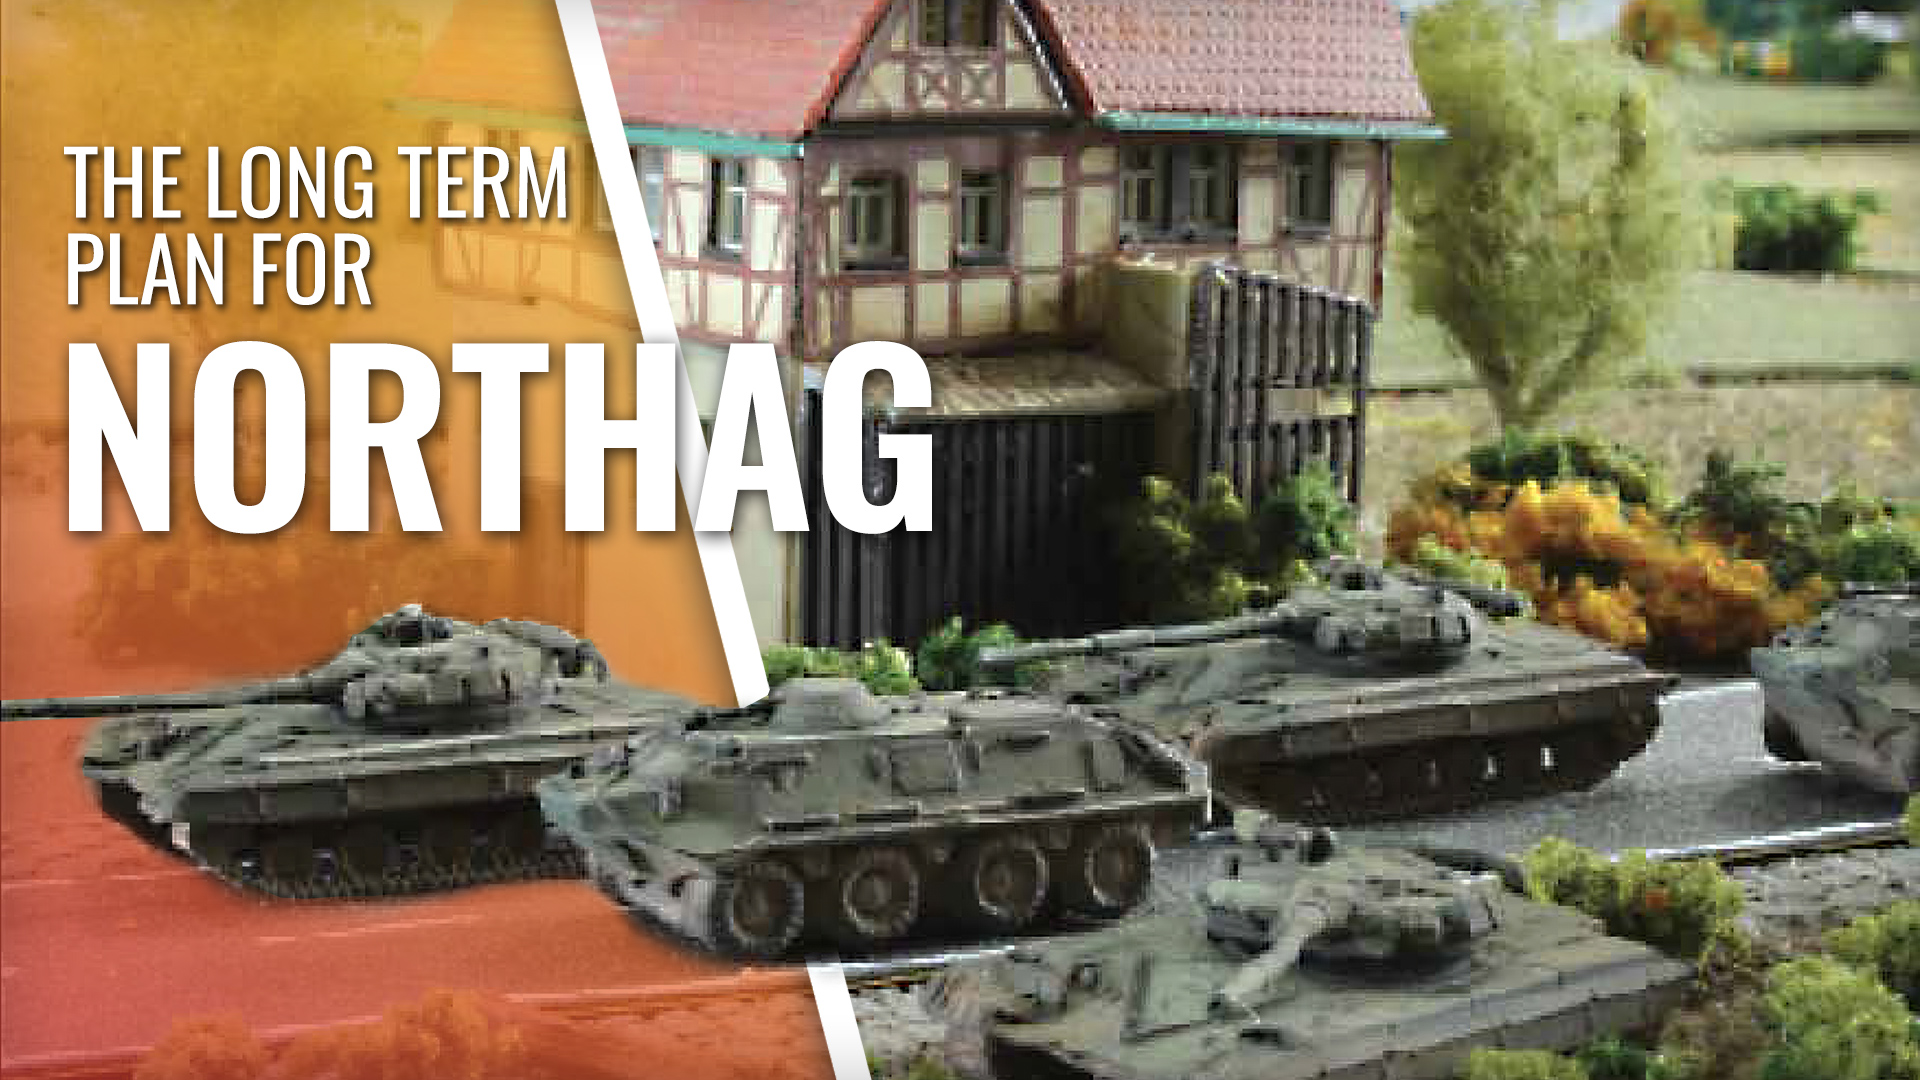 The Future of Battlegroup Northag | PSC Games